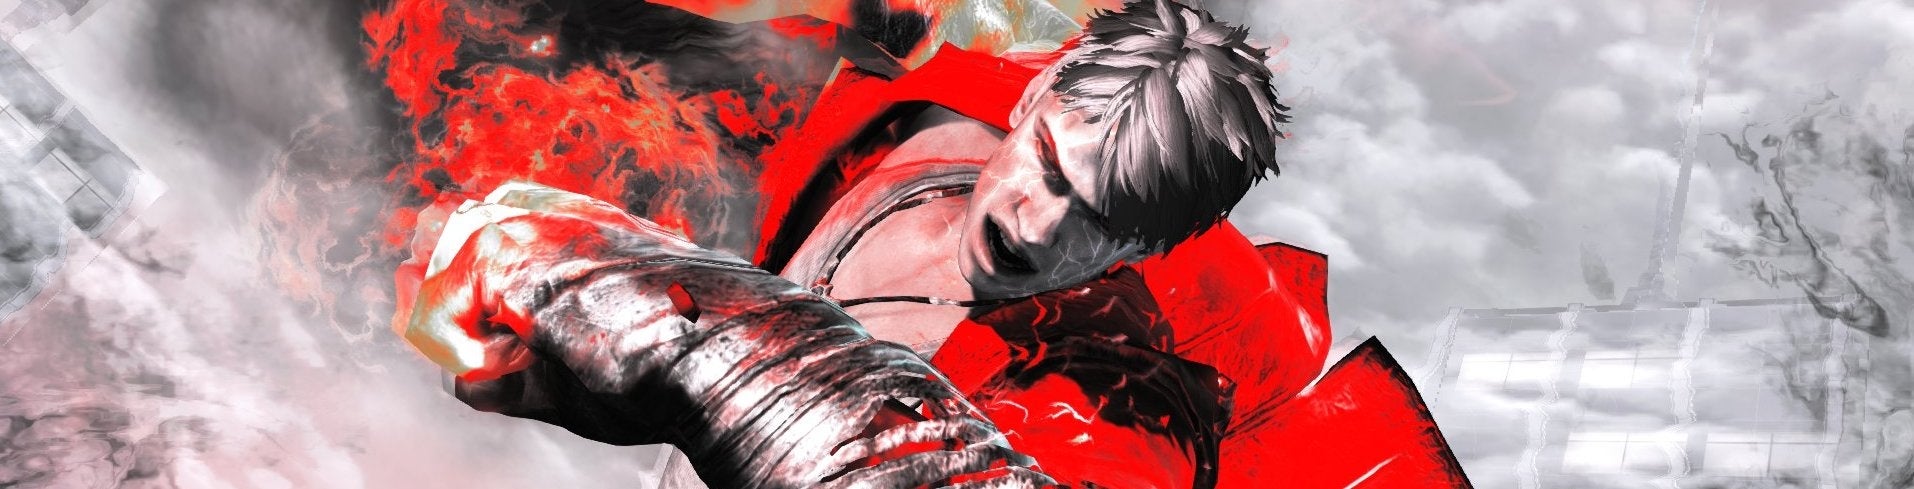 Image for Two years on, DmC takes its rightful place in the series